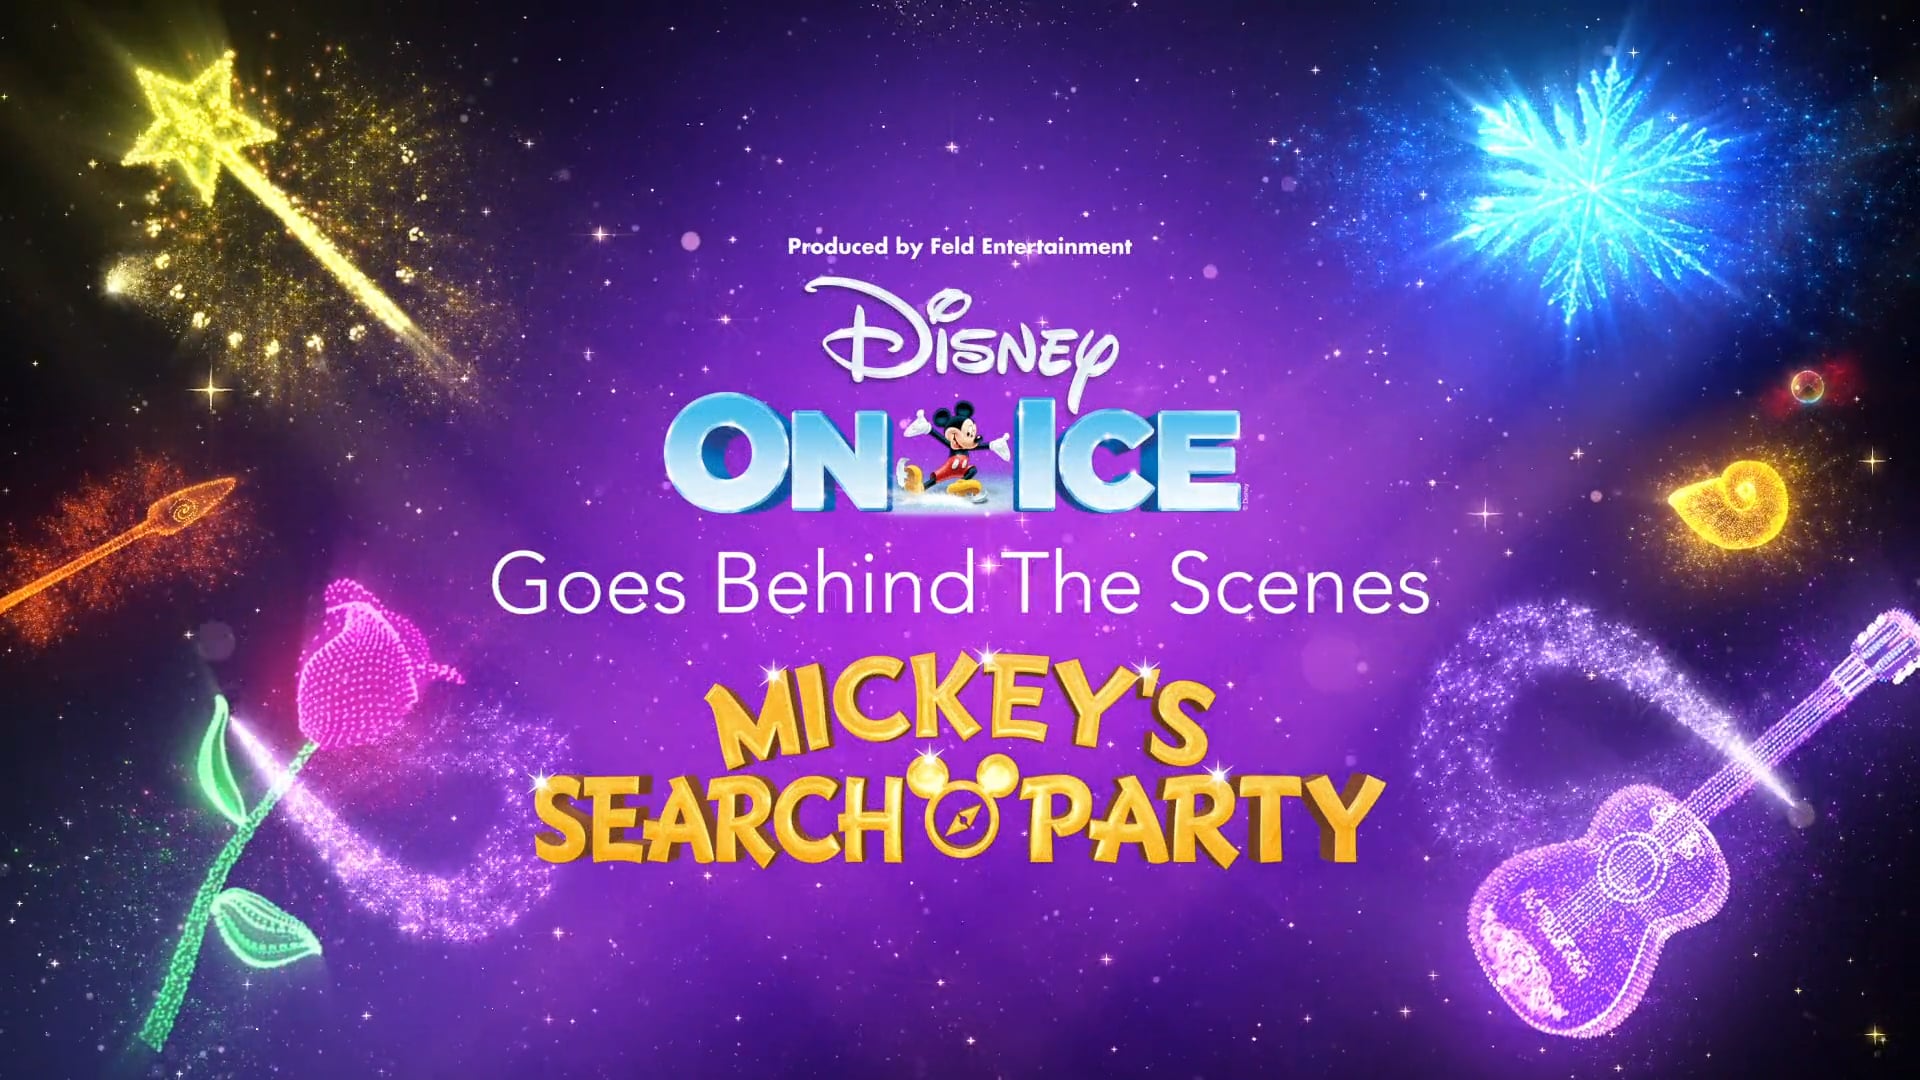 Disney On Ice - Goes Behind The Scenes - Concept 16-9